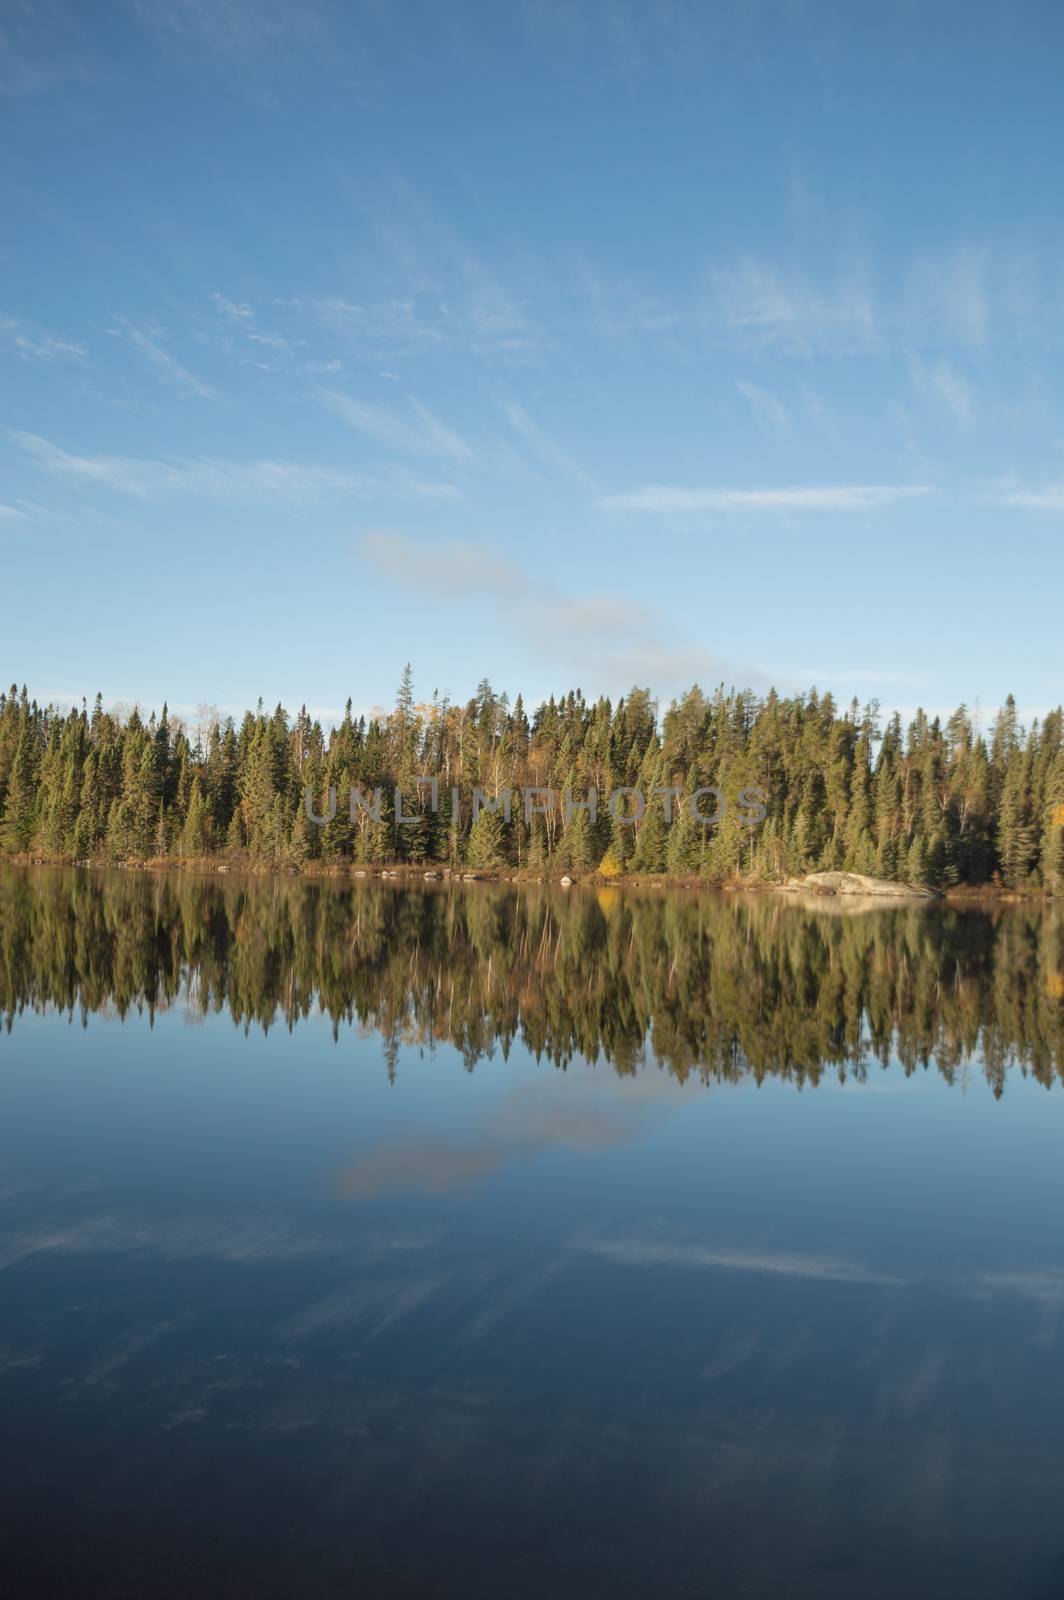 Dead calm lake in early morning with reflections of conifers and wispy cirrus clouds